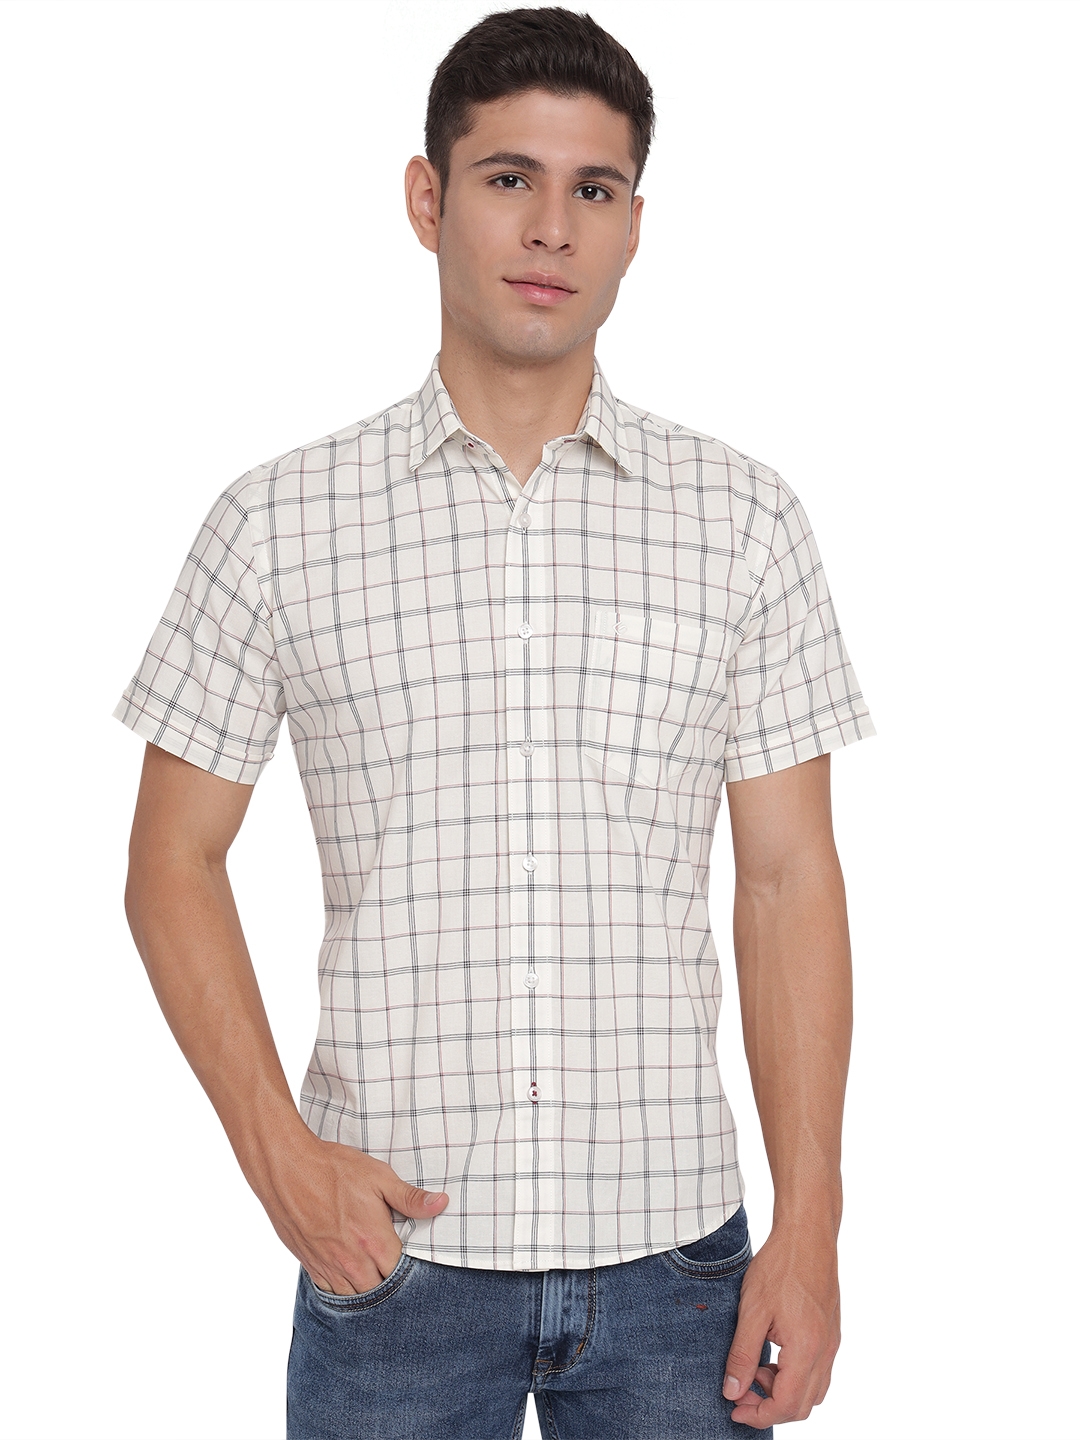 Greenfibre | White Checked Slim Fit Casual Shirt | Greenfibre 0